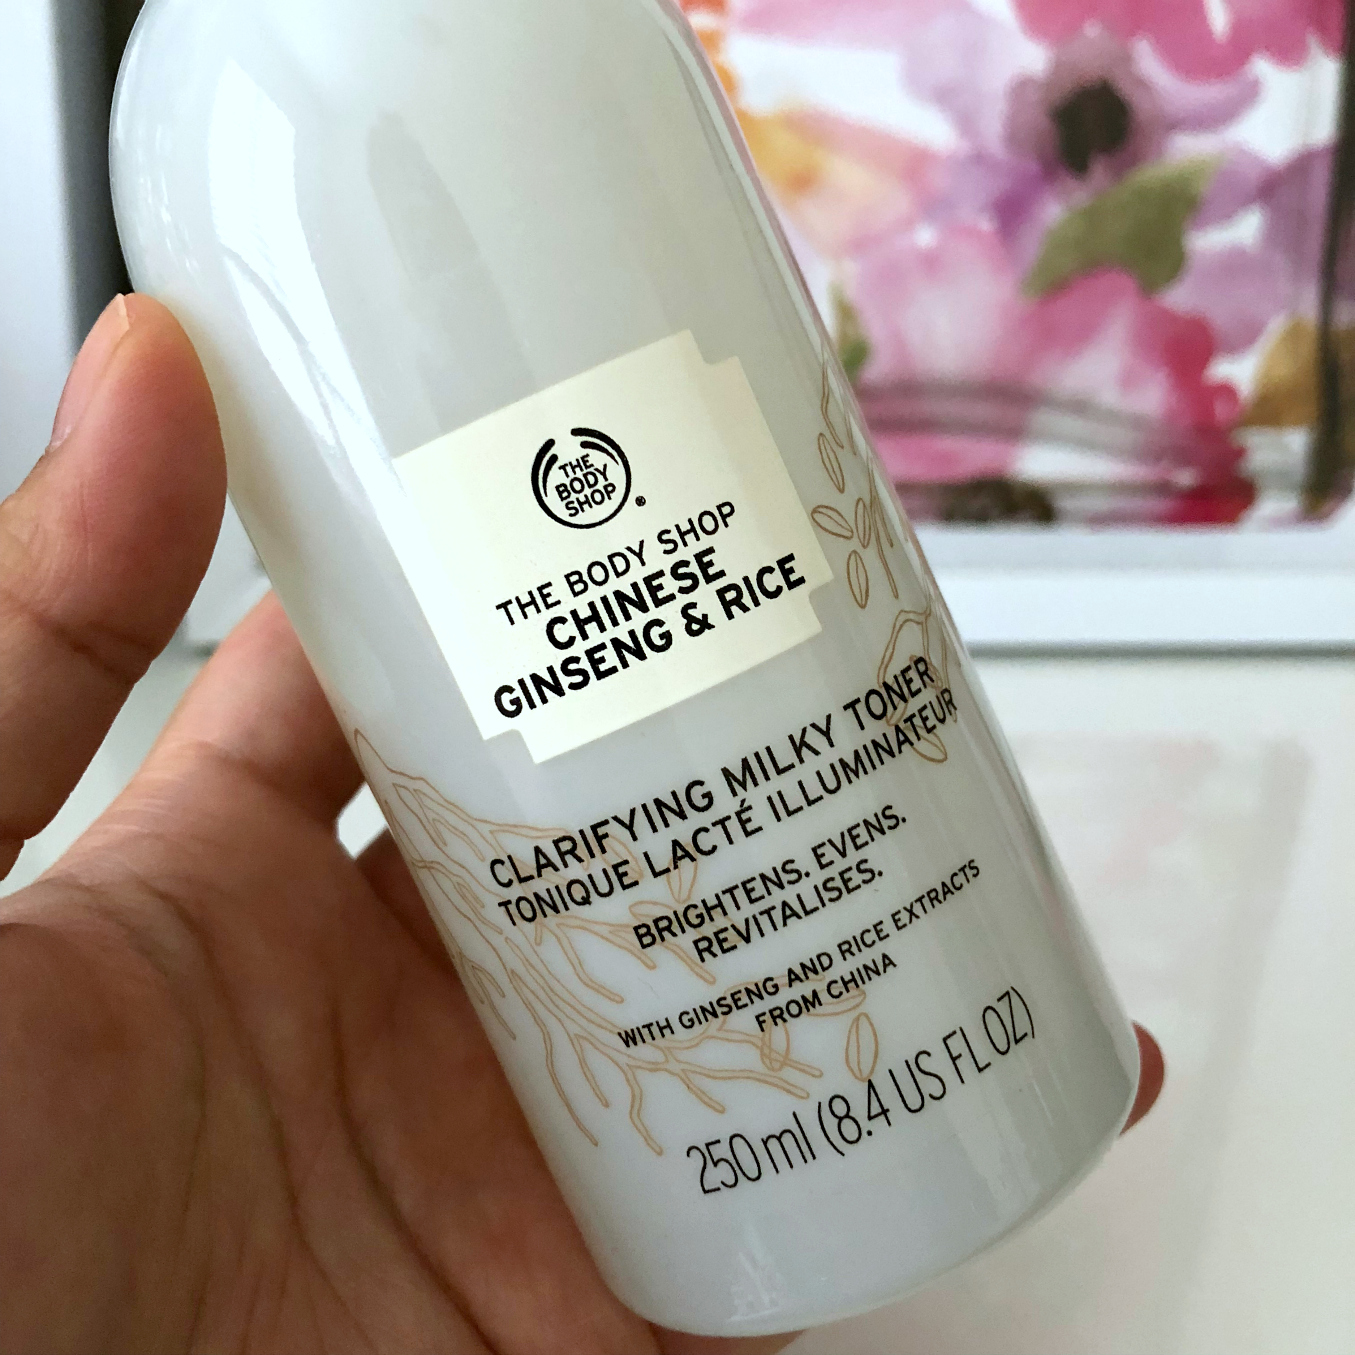 forskellige jeg er syg til stede Body Shop - Tea Tree Anti-Imperfection Night Mask and Chinese Ginseng &  Rice Clarifying Milky Toner review* - miranda loves